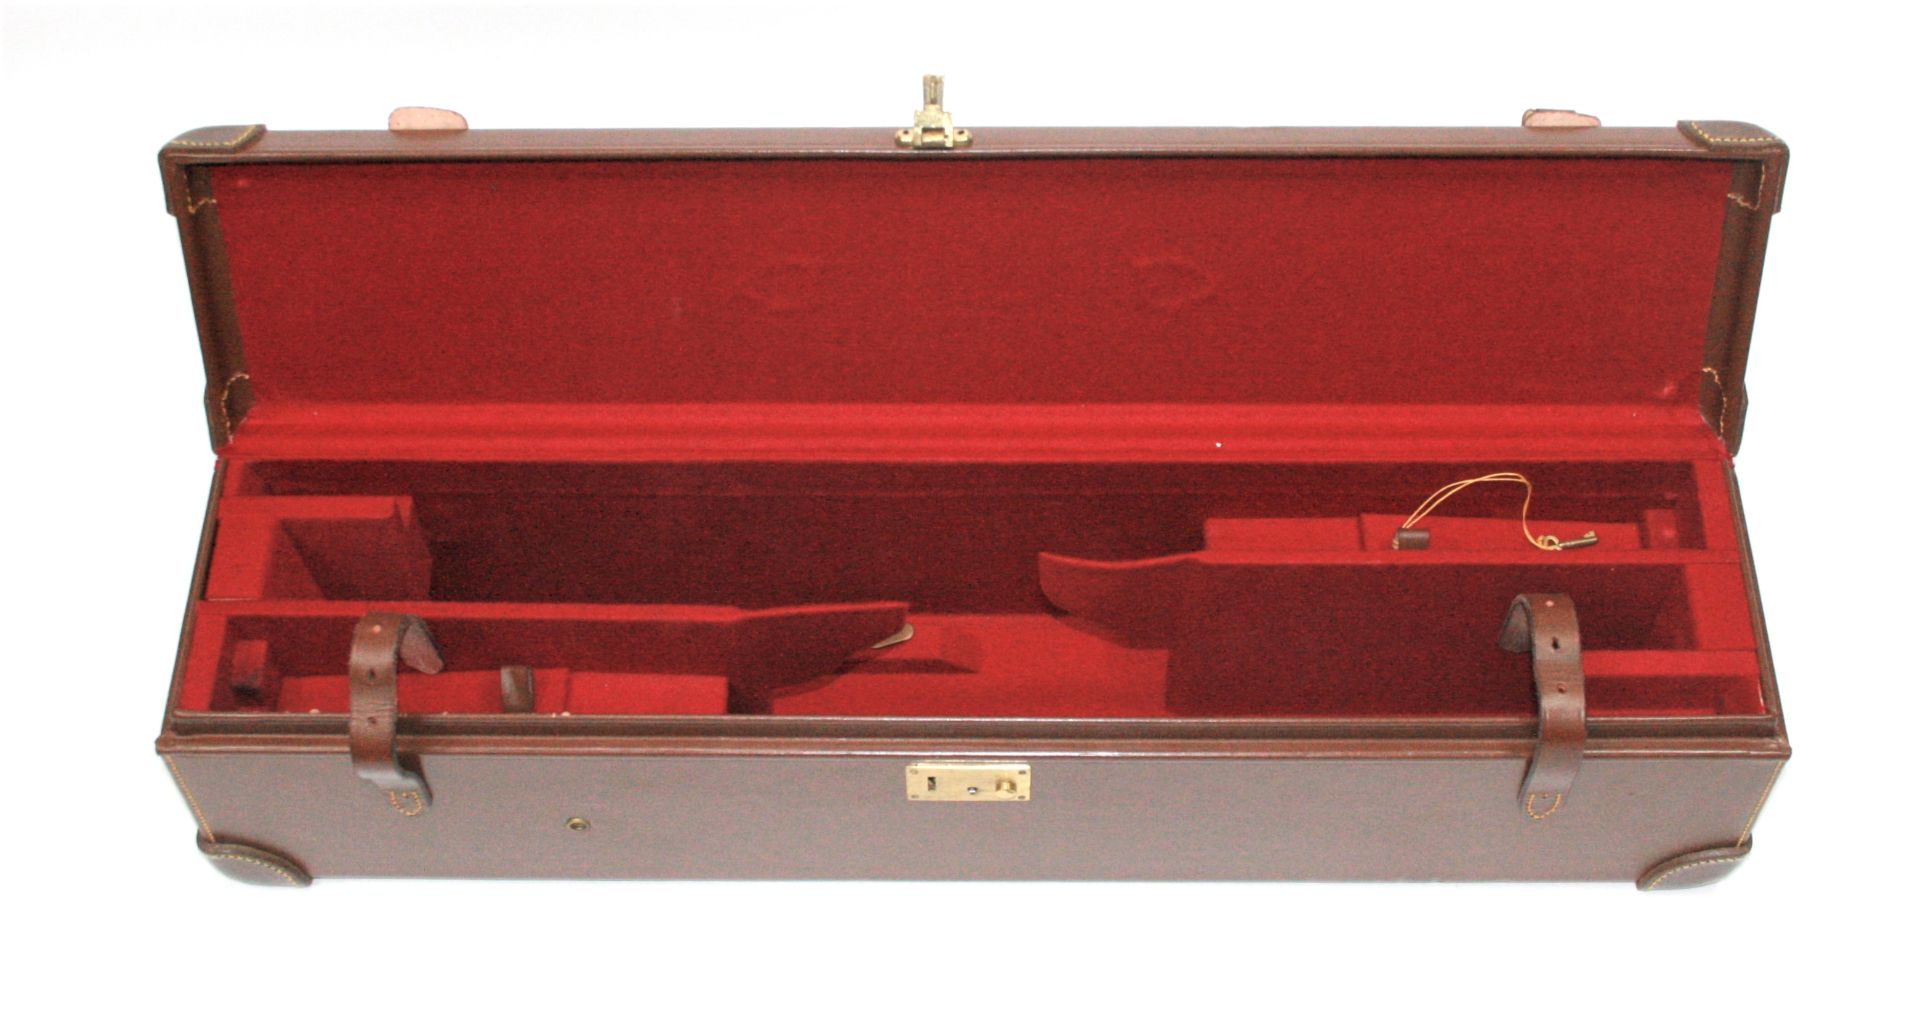 A double leather motorcase